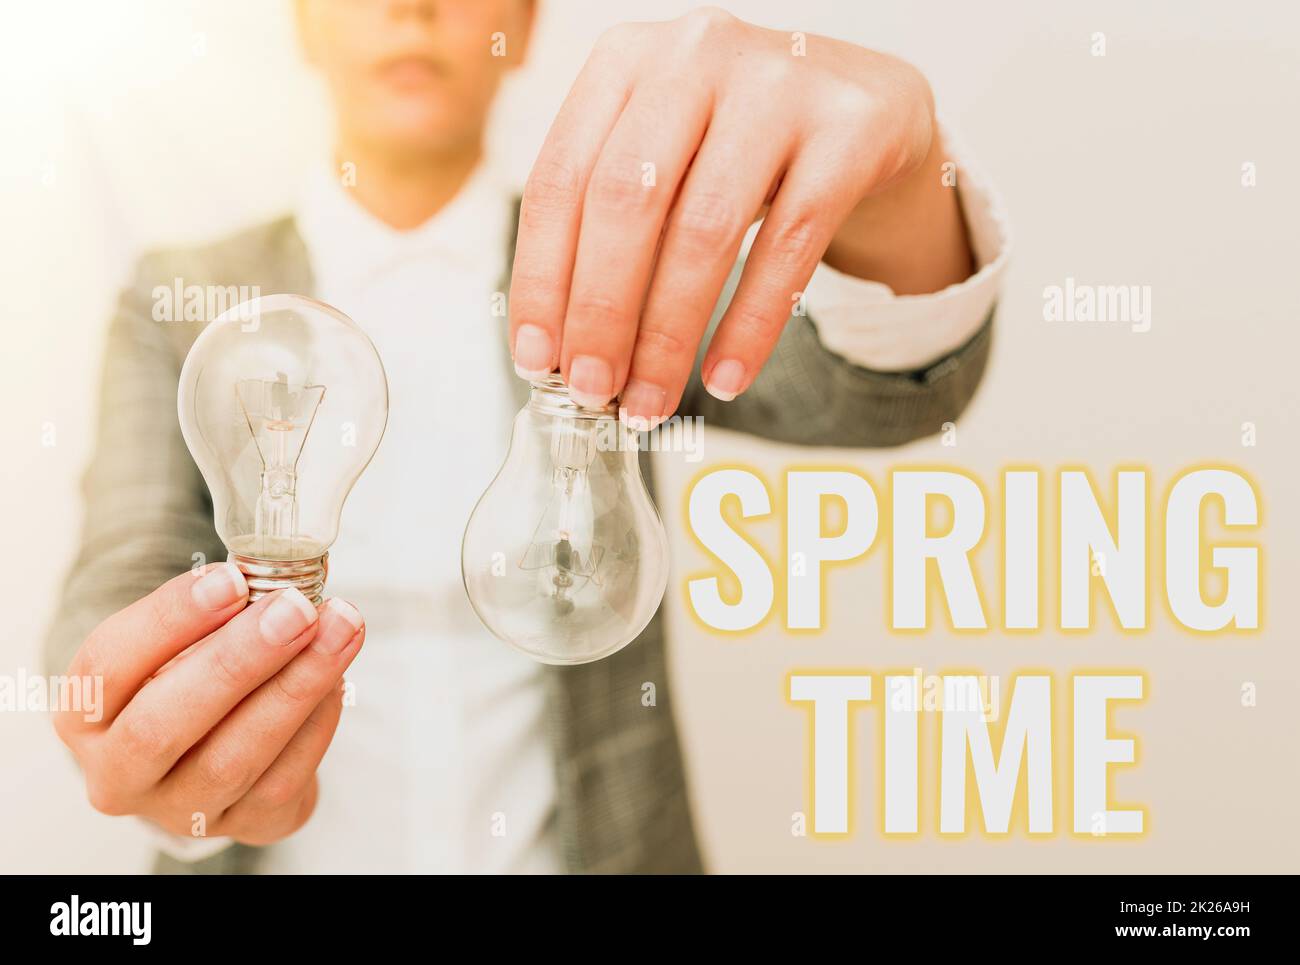 Writing displaying text Spring Time. Word Written on temperate season of the year identified by a revival of plants Lady outfit holding two lamps upside down presenting new technology ideas Stock Photo